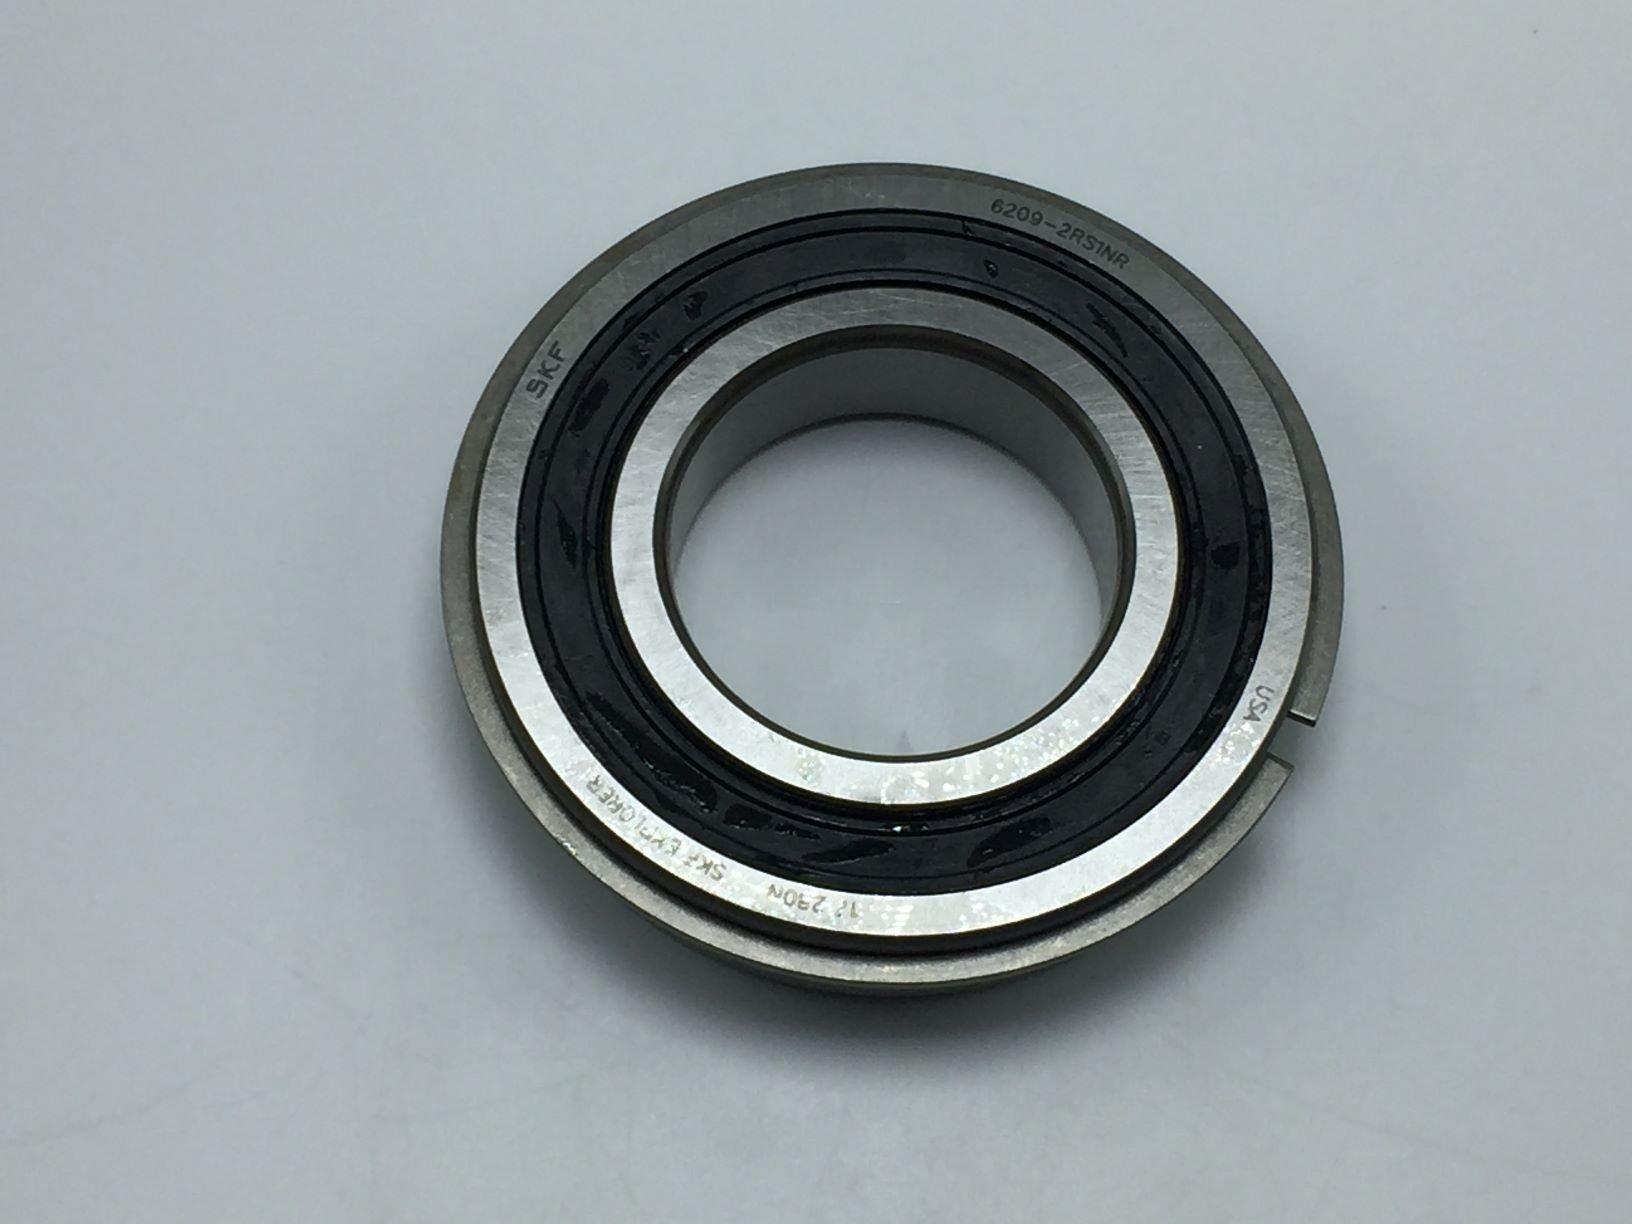 NEW SKF 6209-2RS1NR RADIAL DEEP GROOVE BALL BEARING 45MM BORE PN# 6209-2RS1NR 